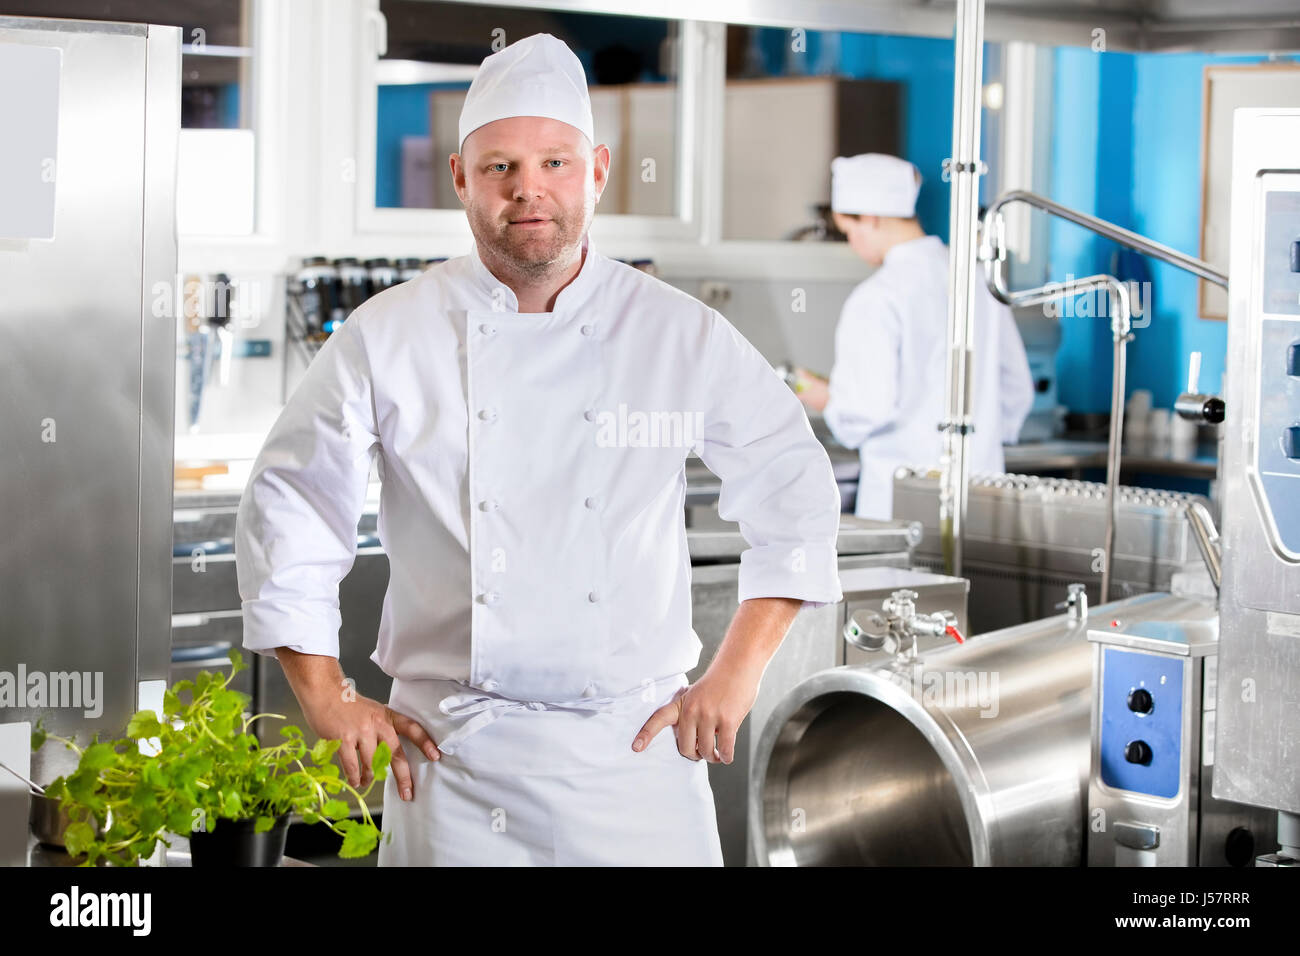 Portrait of confident and smiling chef making food in large kitchen Stock Photo